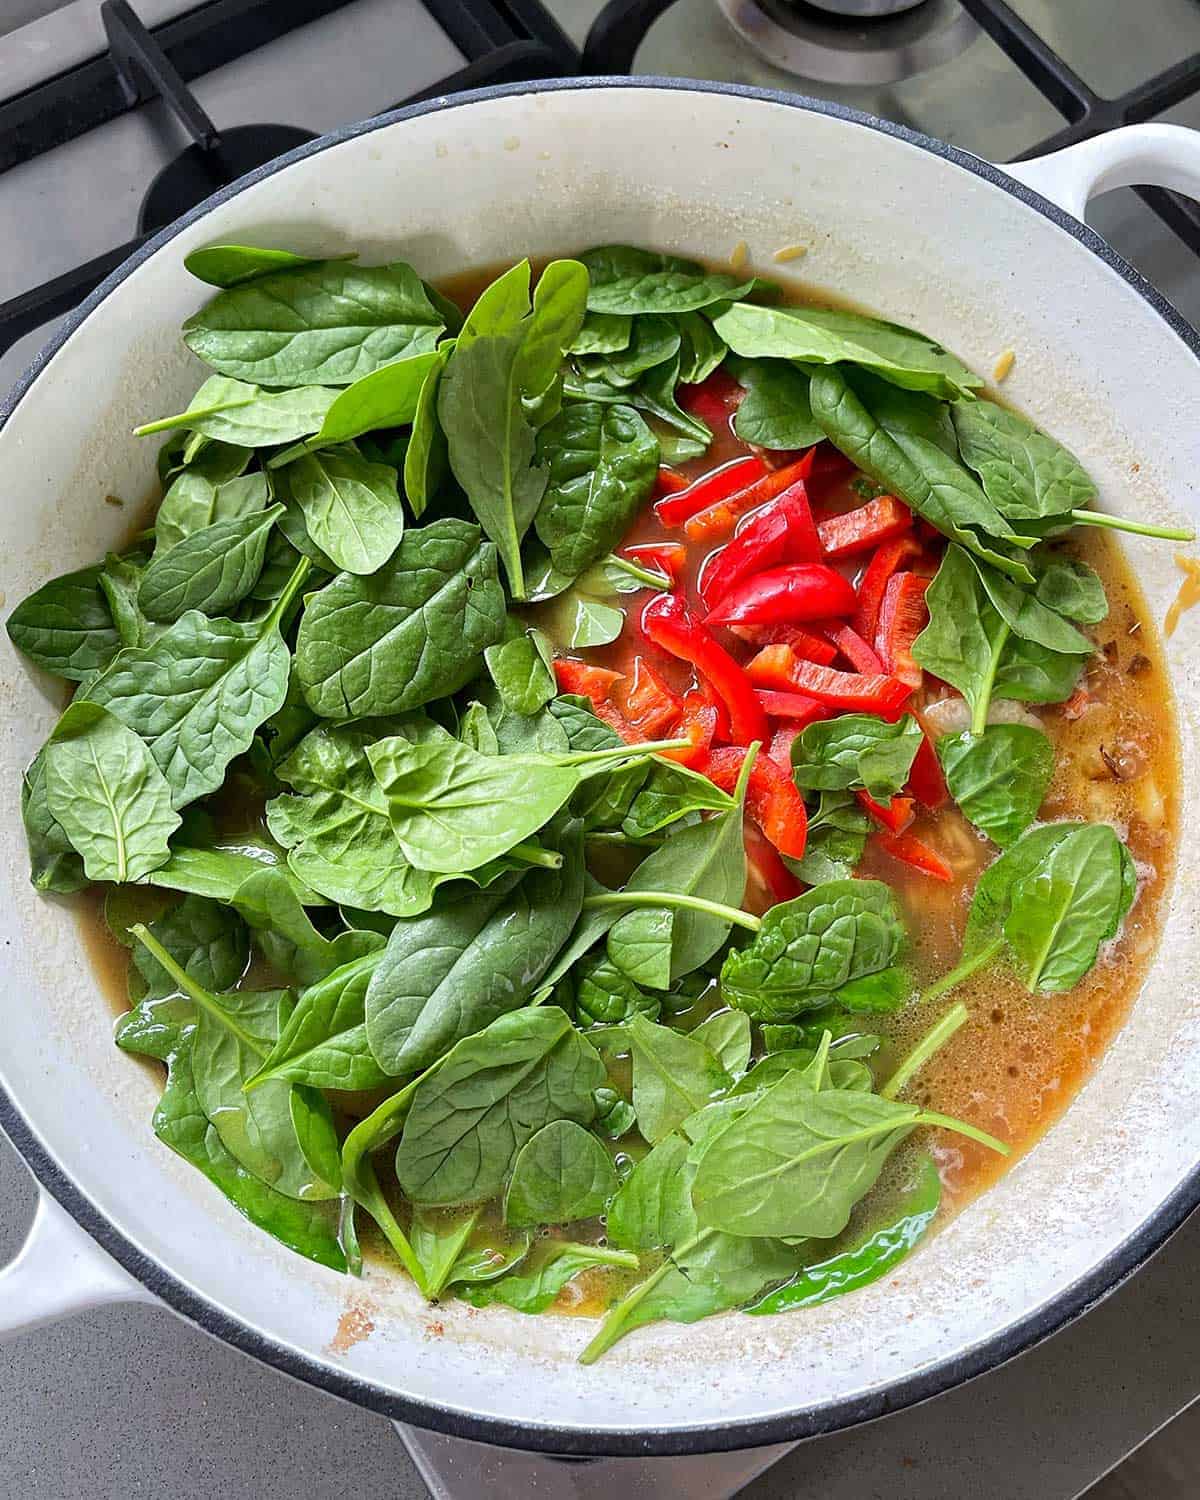 Spinach and capsicum cooking in a large white frying pan.